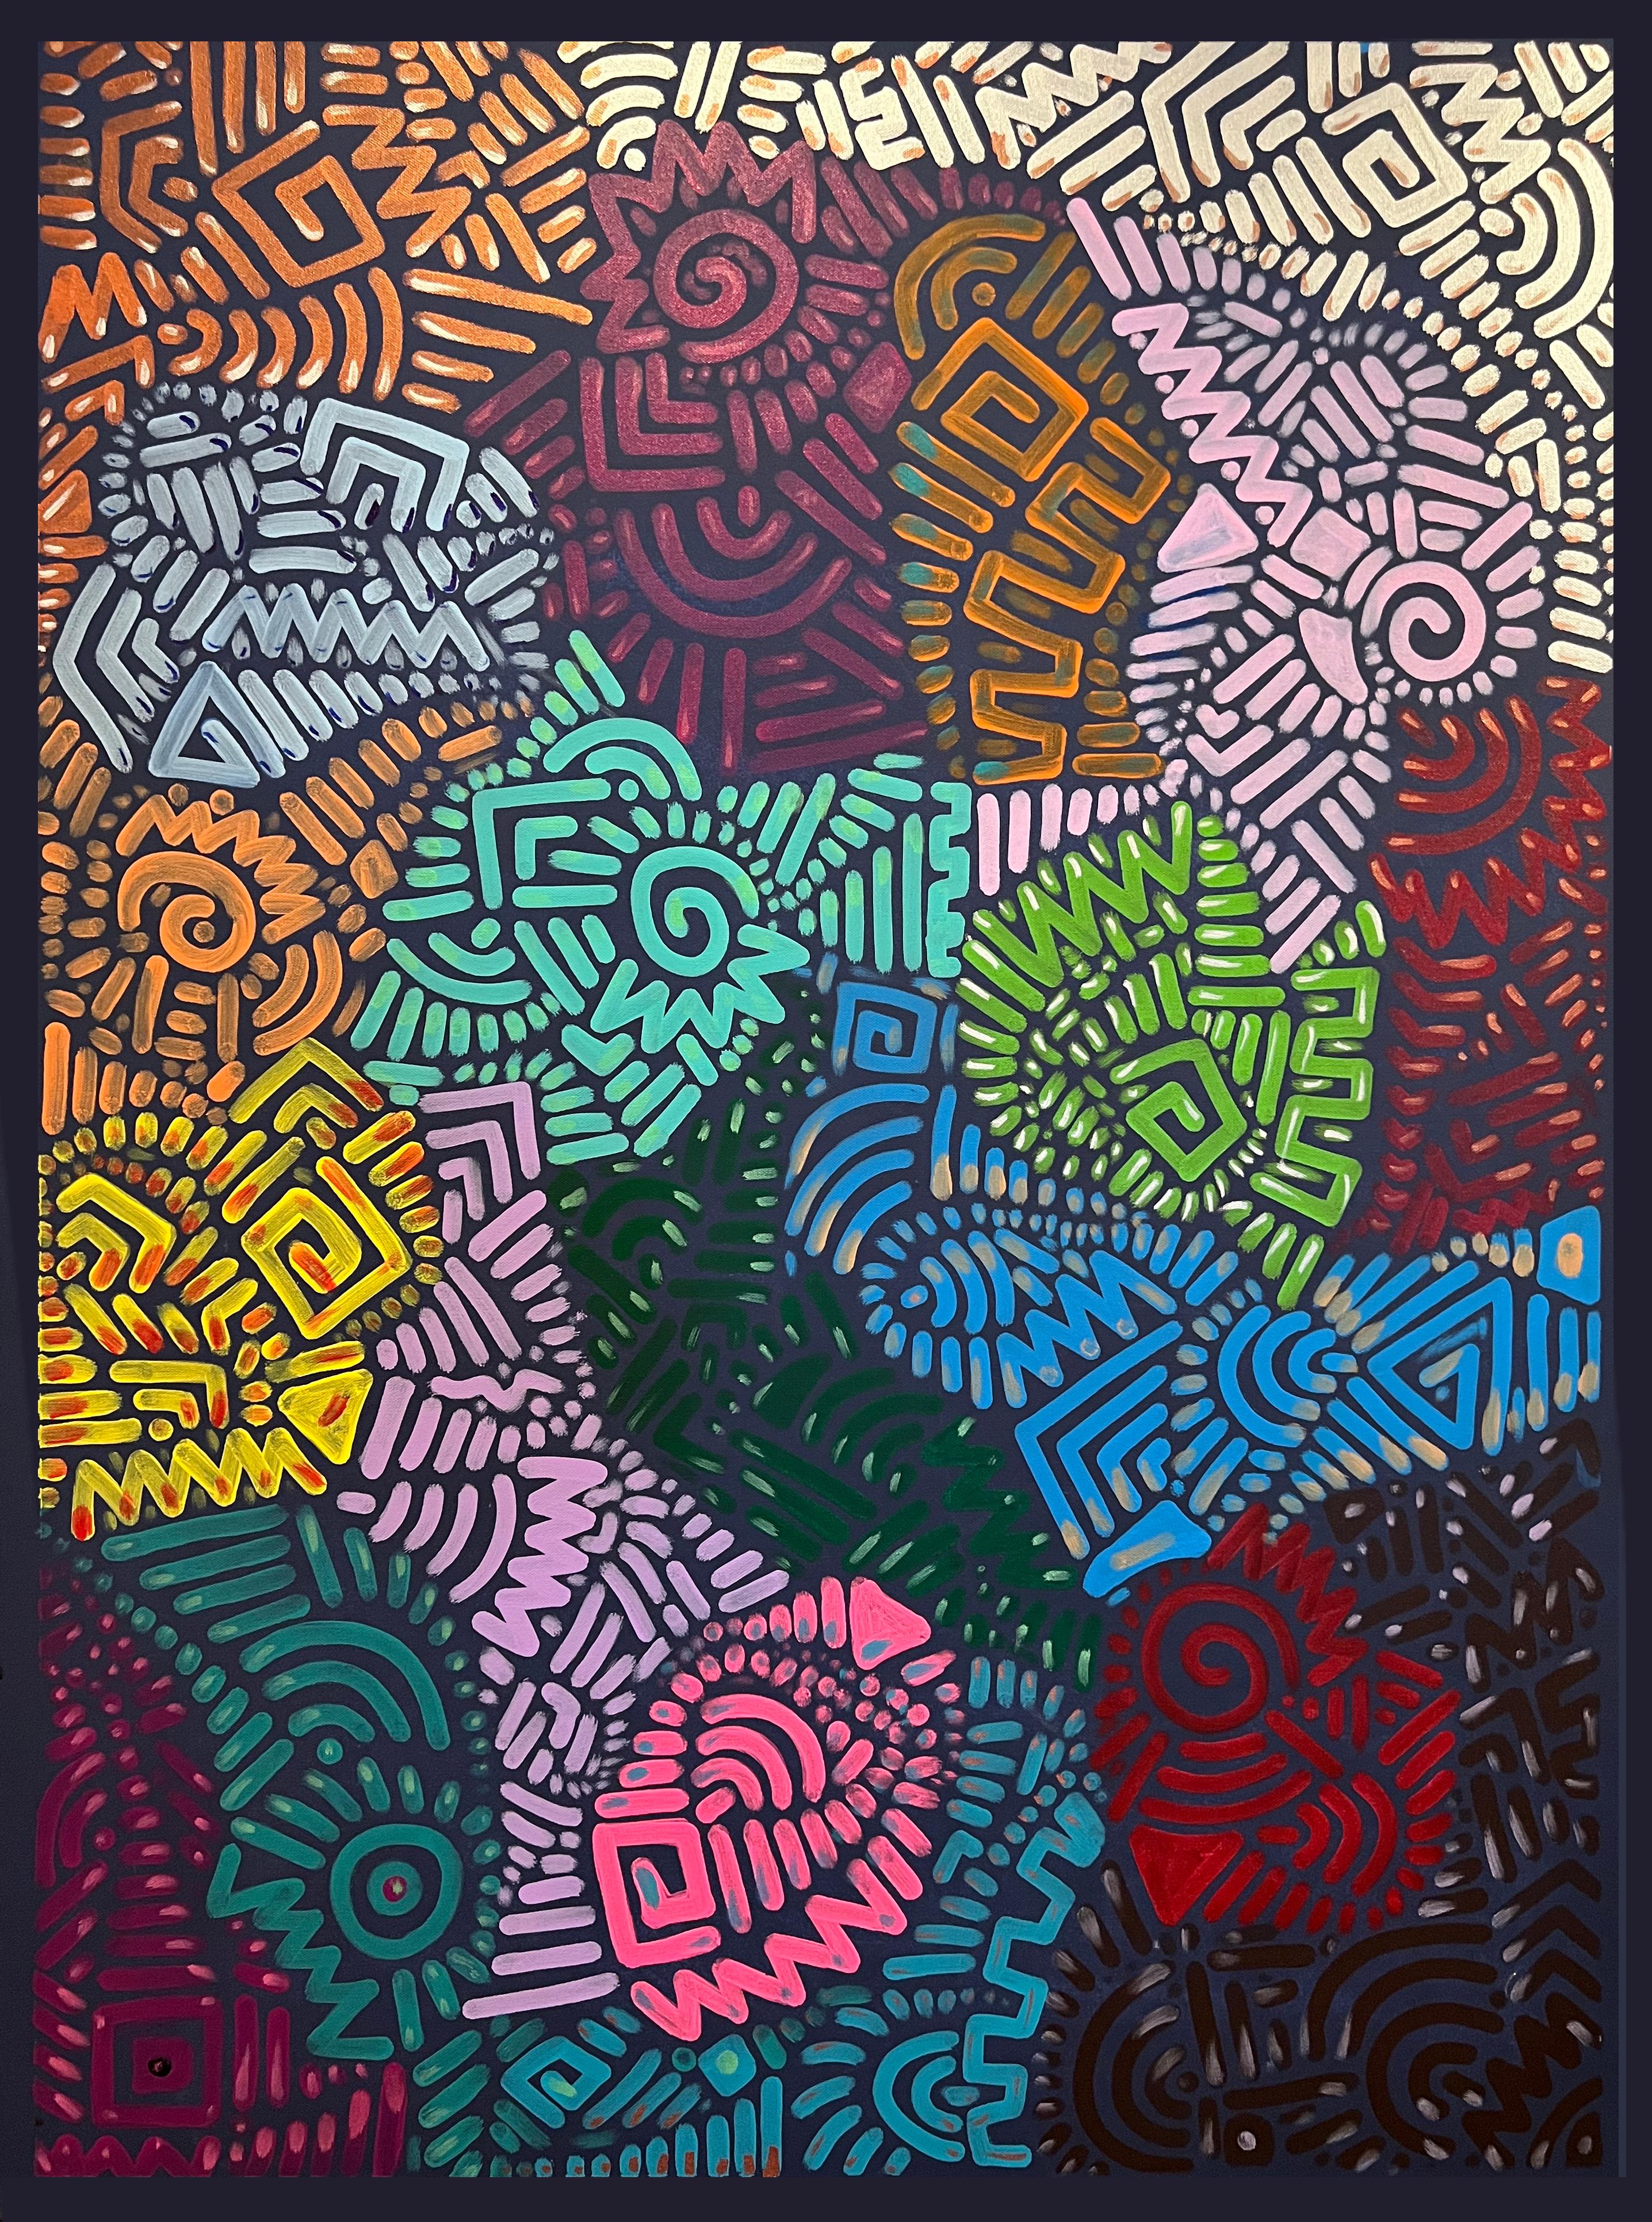 Contemporary Color Swirls, Keith Haring inspired unique Abstract Painting - Mixed Media Art by Avi Ash